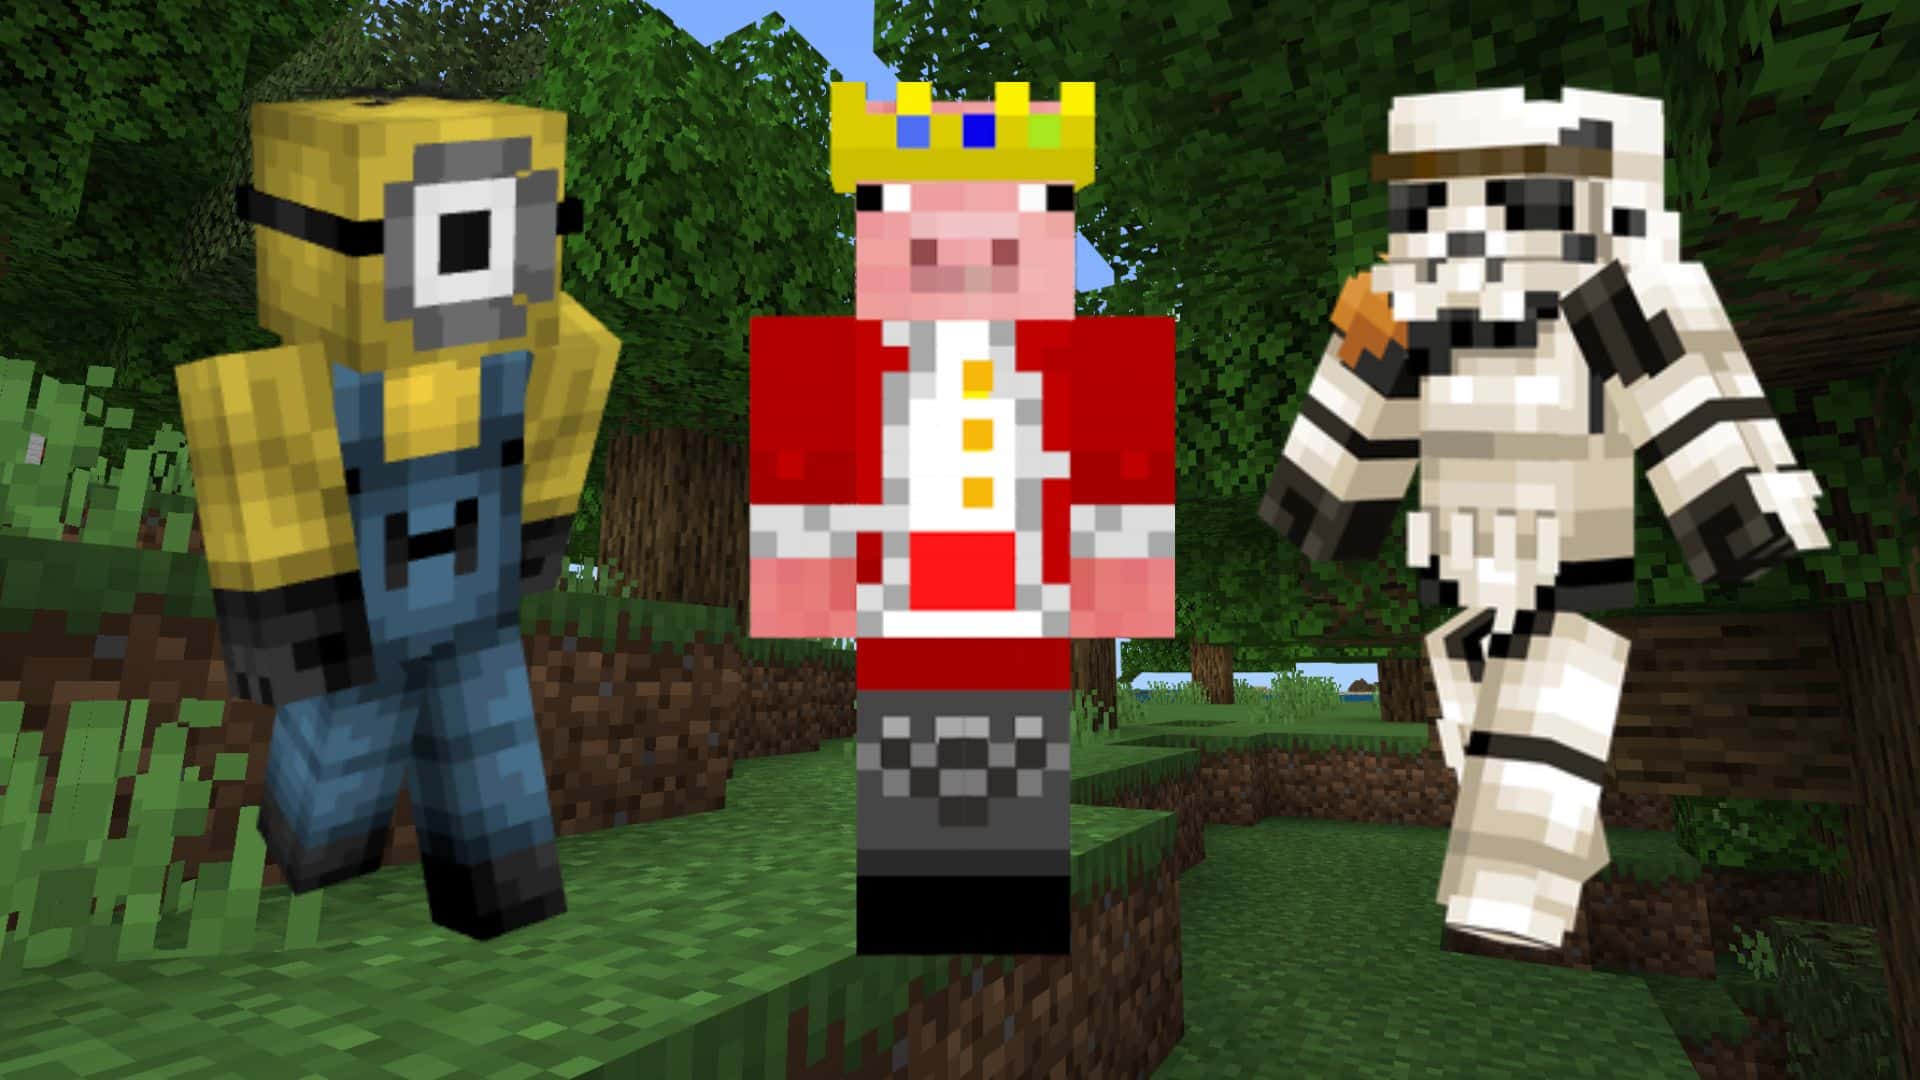 What are the stories behind your minecraft skins?